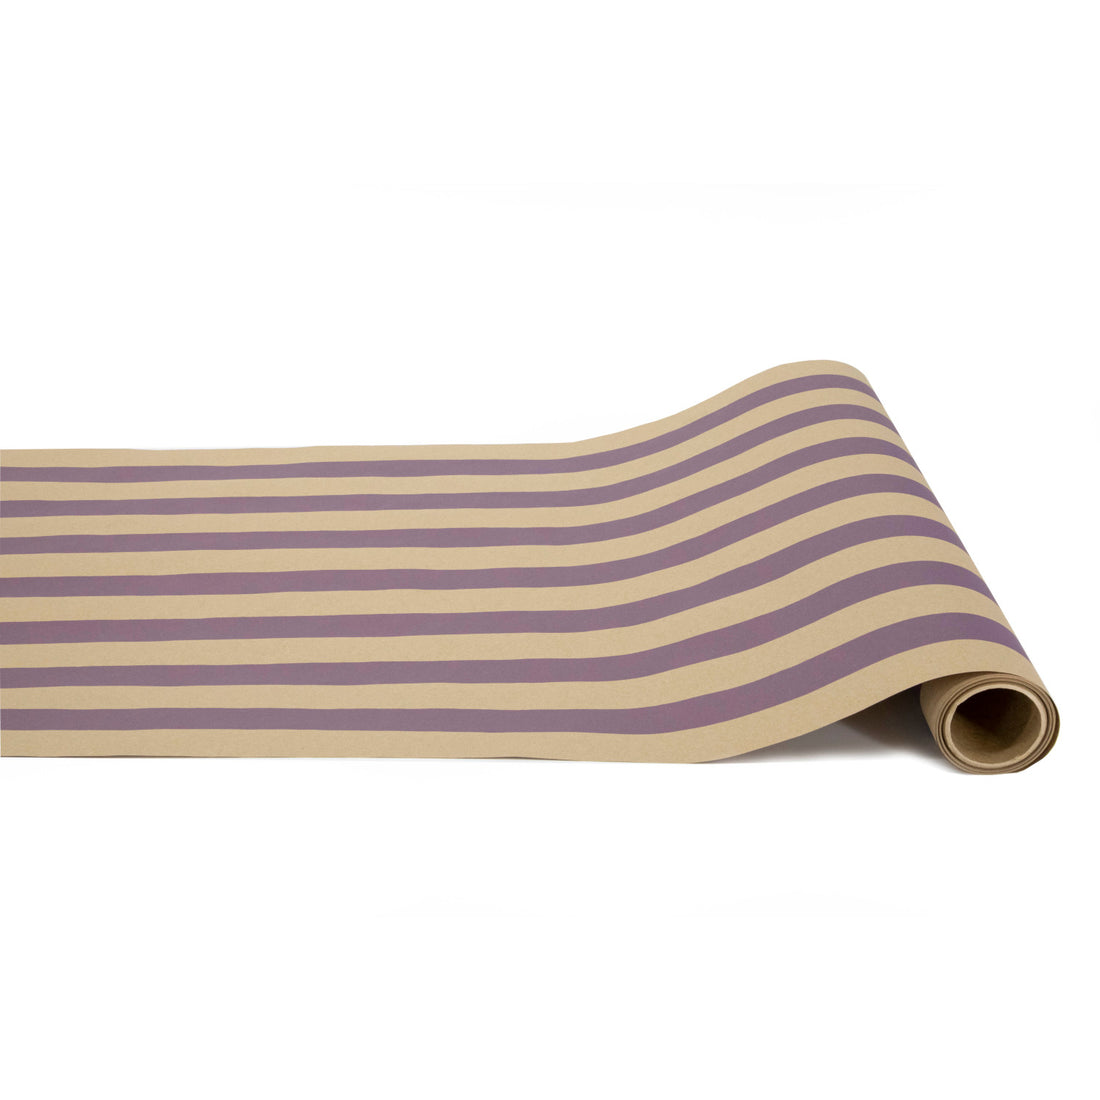 An entertaining roll of Kraft Purple Stripe Runner, perfect for gift wrapping or as a table runner.